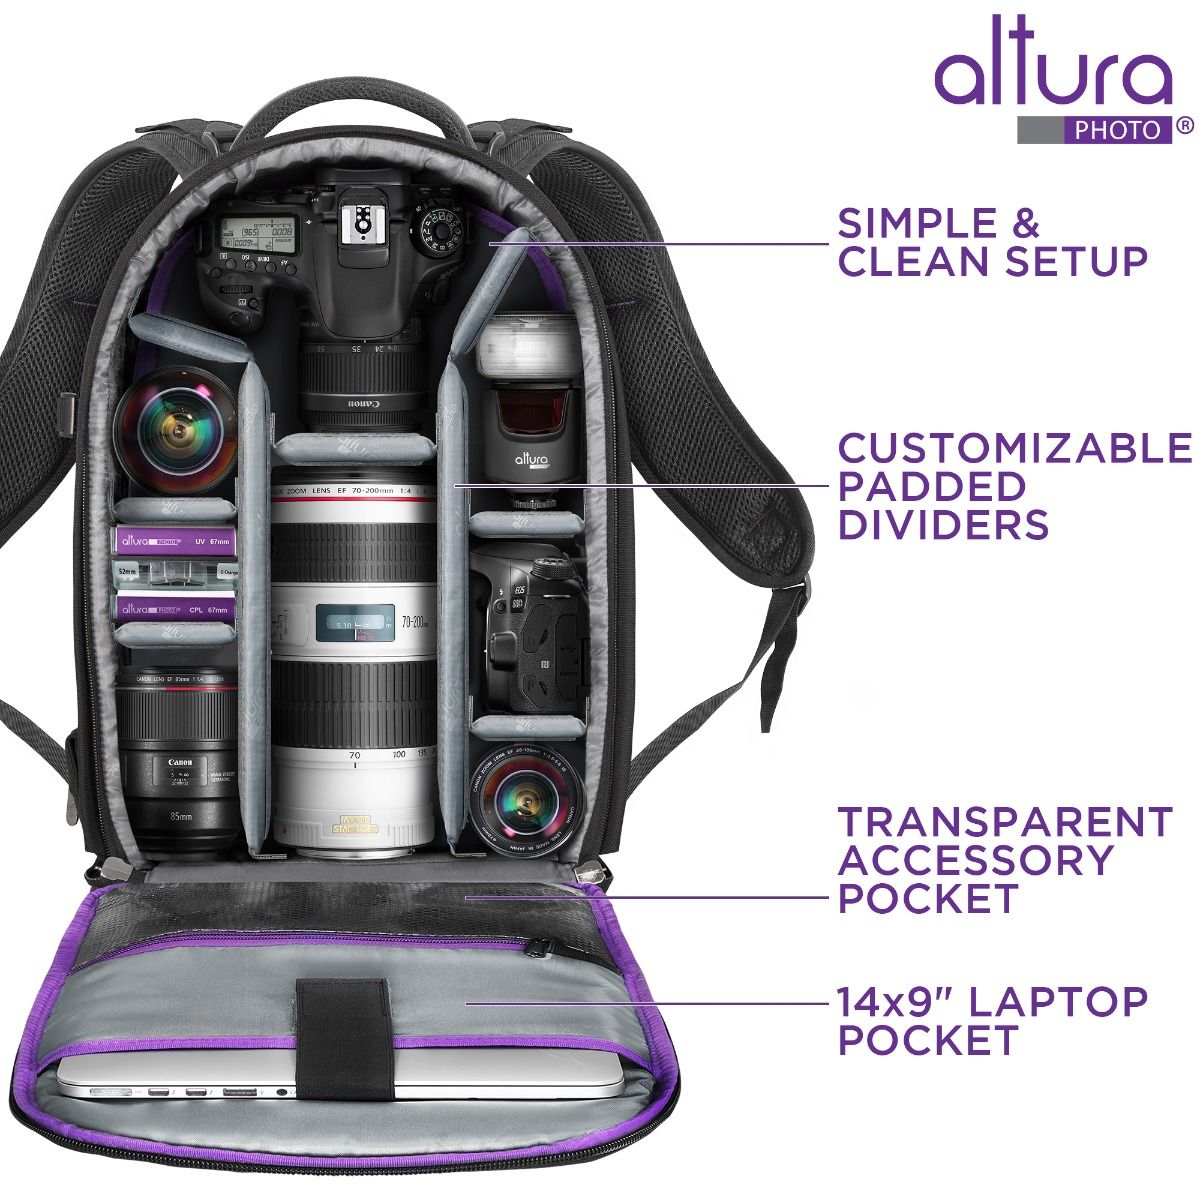 Camera Backpack with Laptop Case for Canon Nikon Sony Mirrorless and DSLR Camera, Light and other Photography Accessories - Large Capacity Black Bag with Tripod Holder by Altura Photo